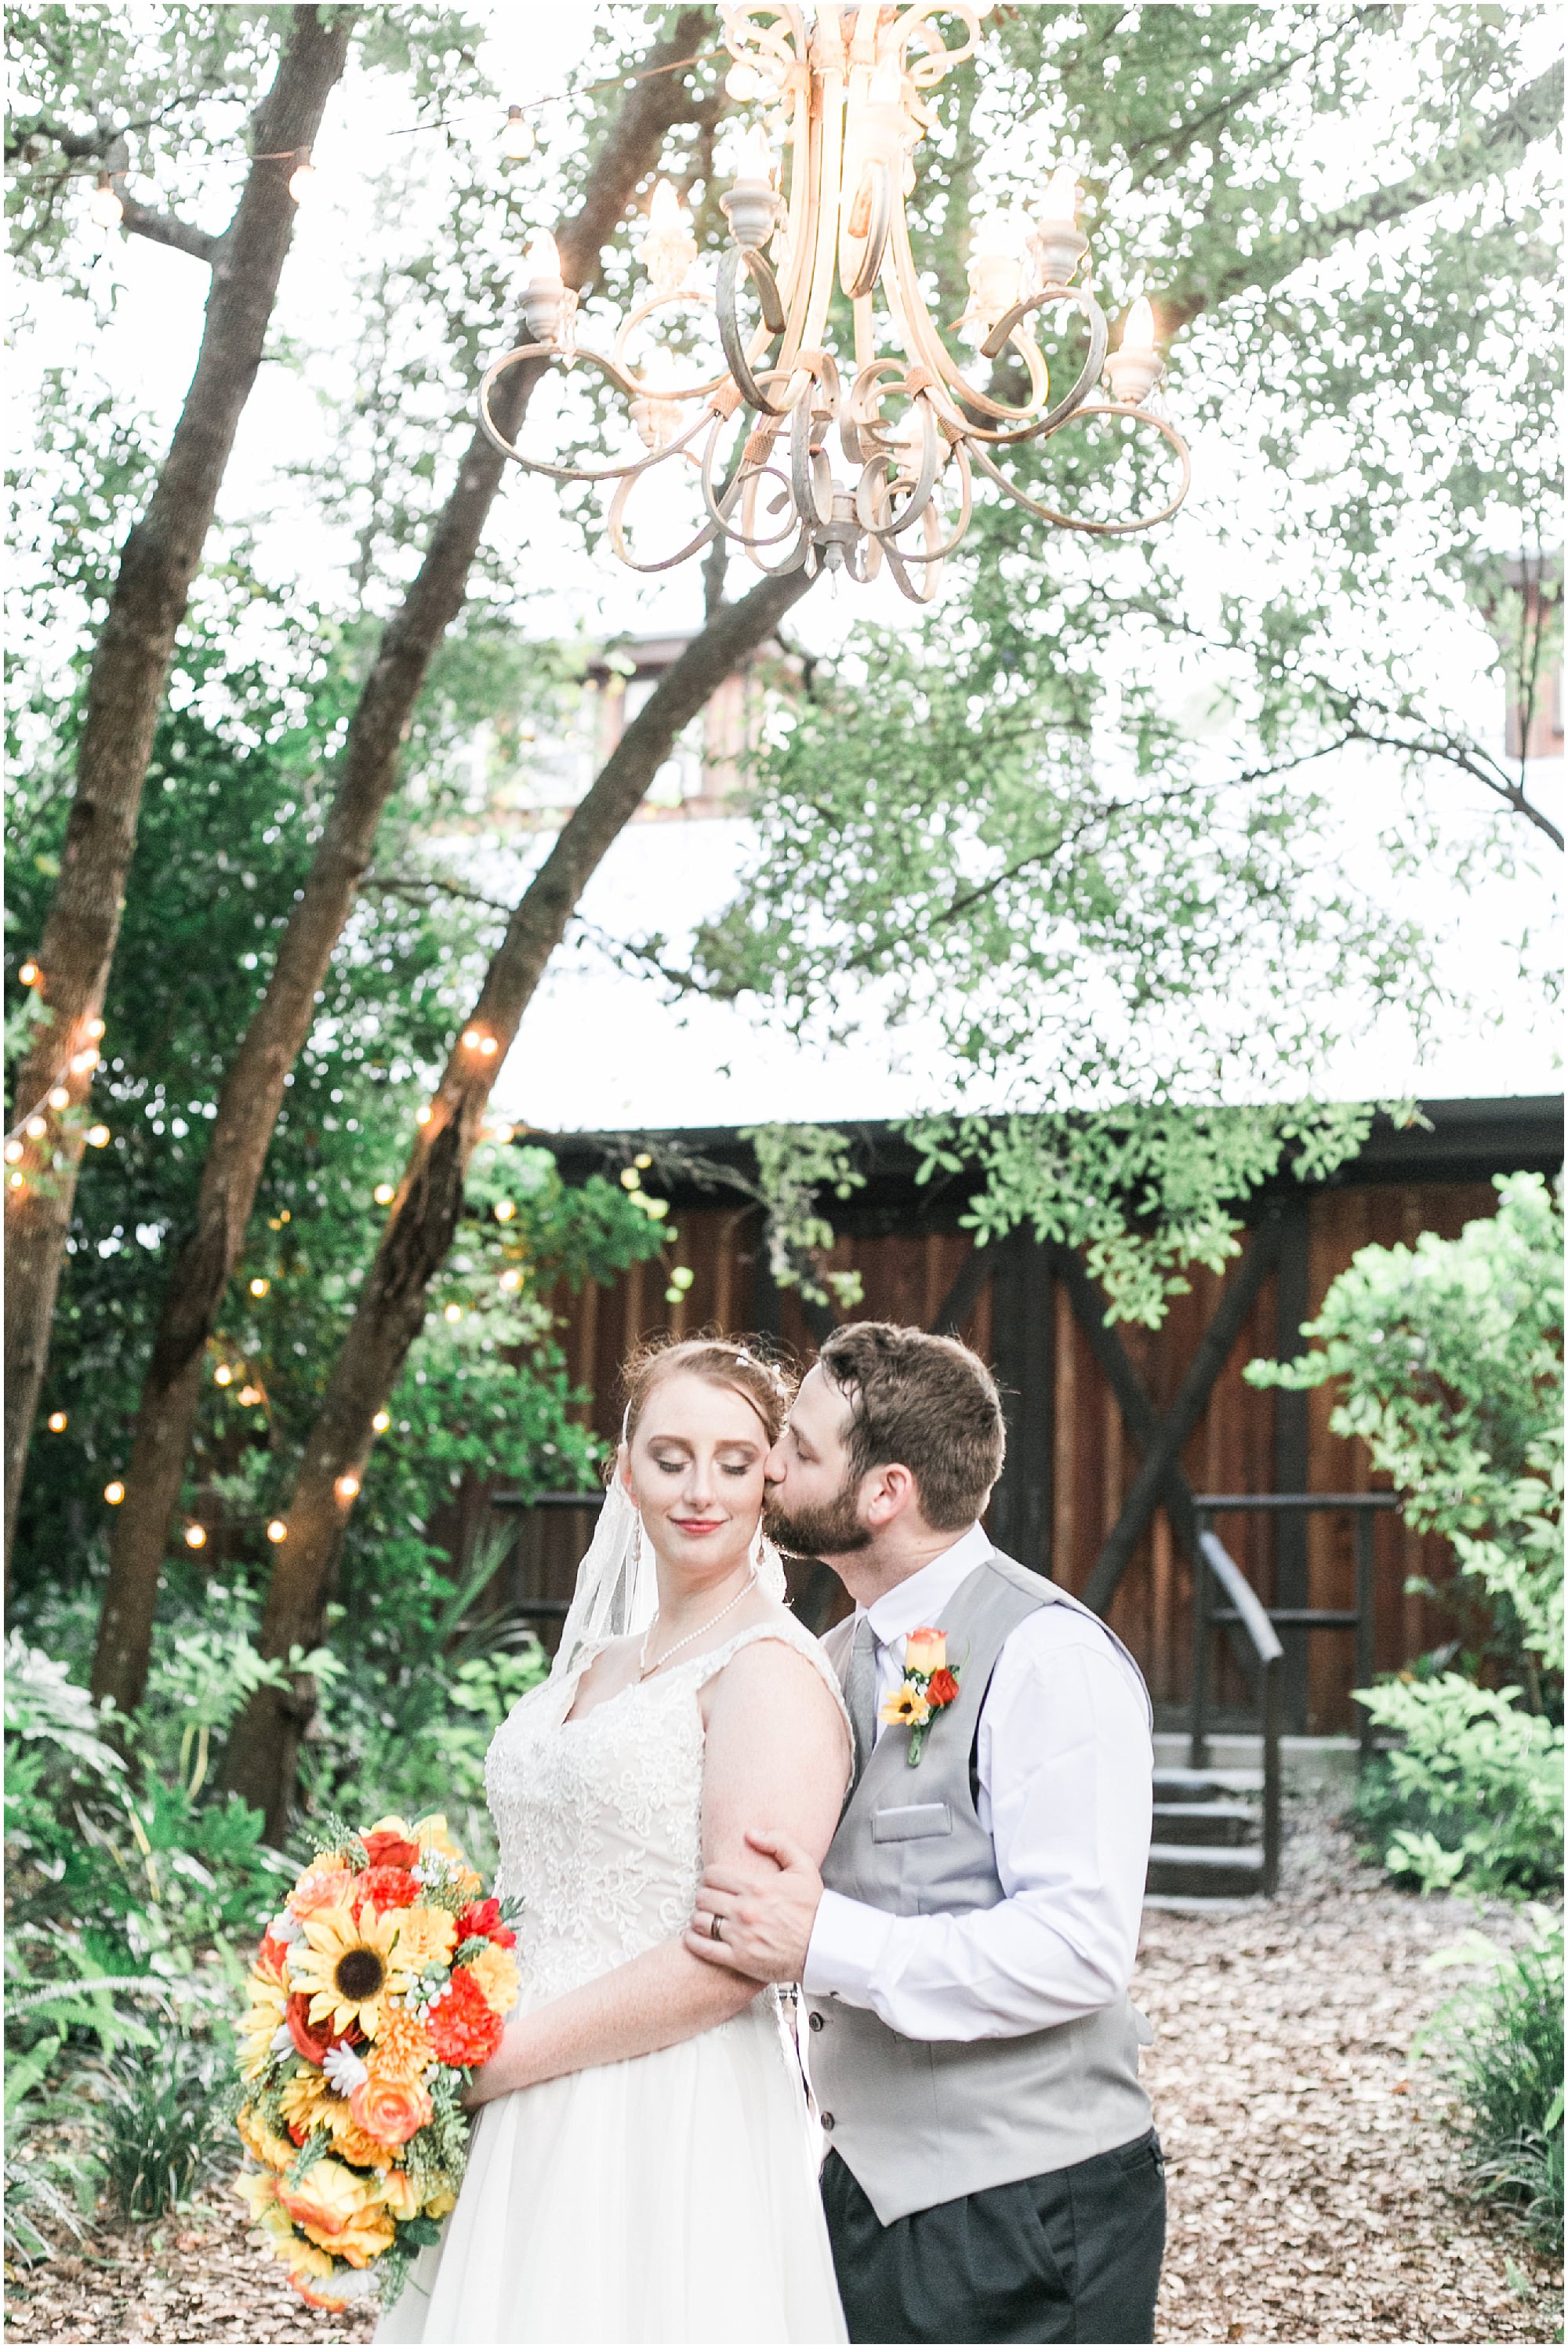 Enchanted Forest Wedding couple standing under a chandelier and market lights hanging from trees